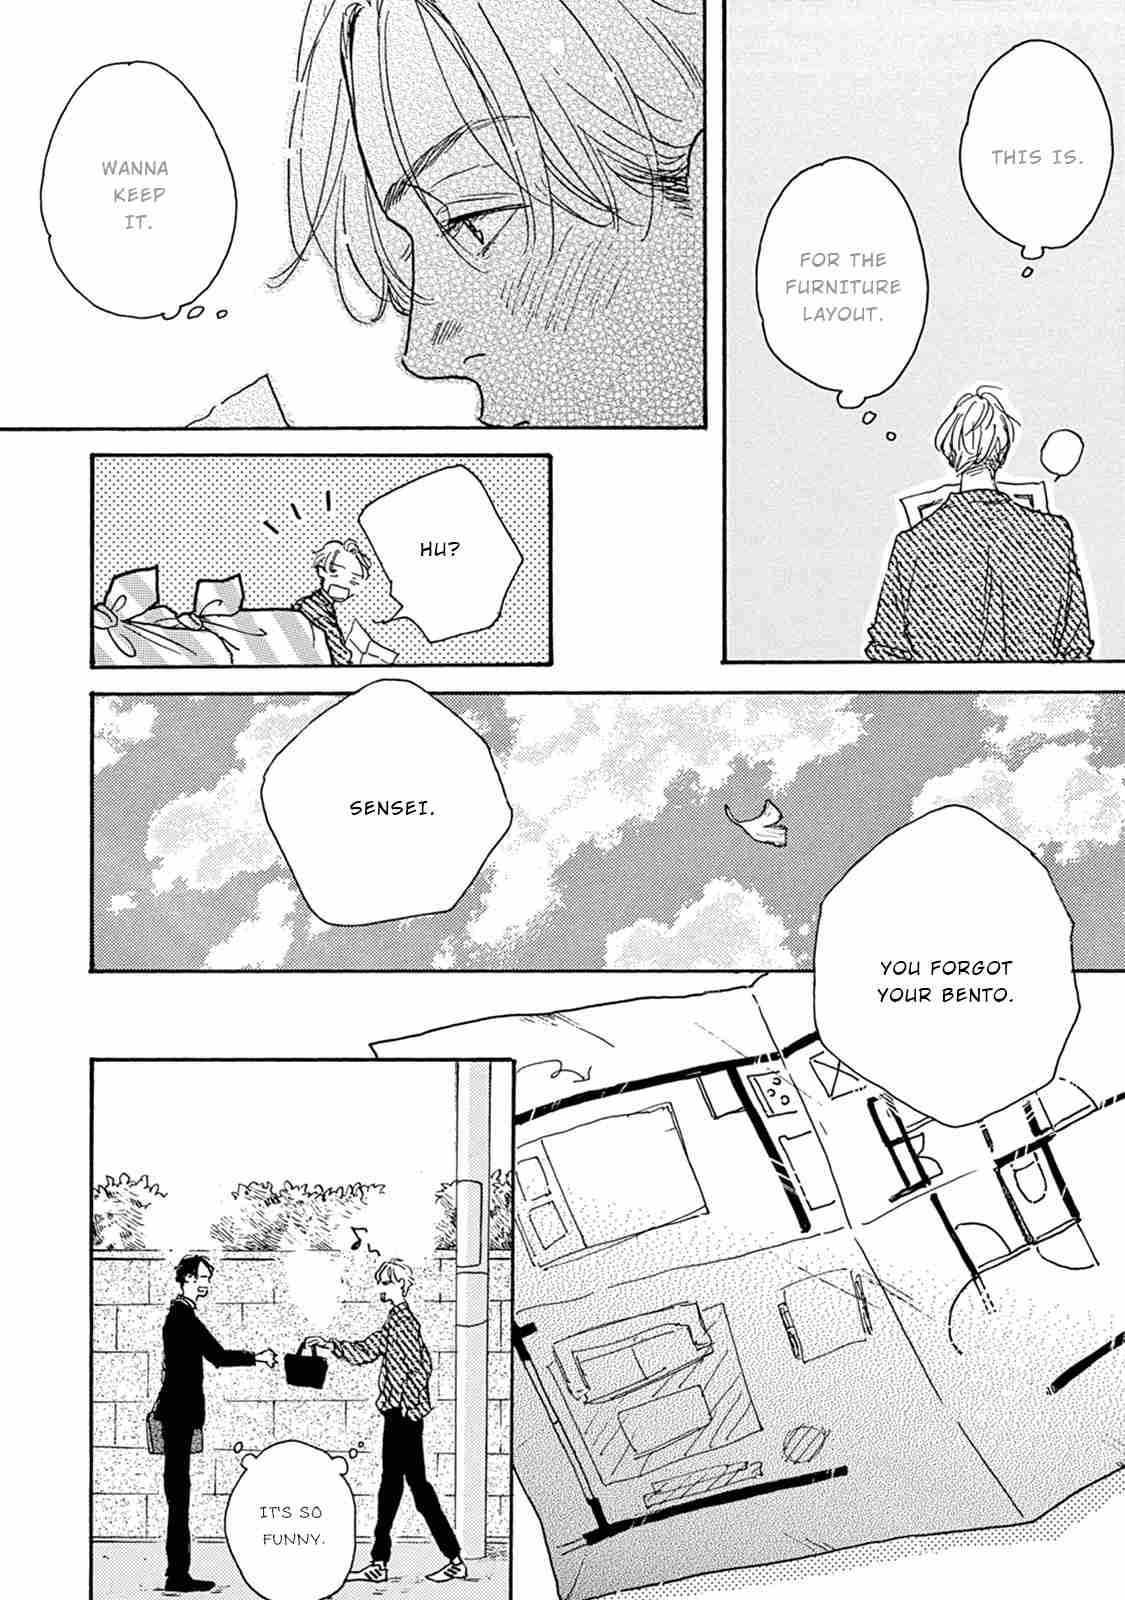 Young Bad Education Vol. 2 Ch. 9